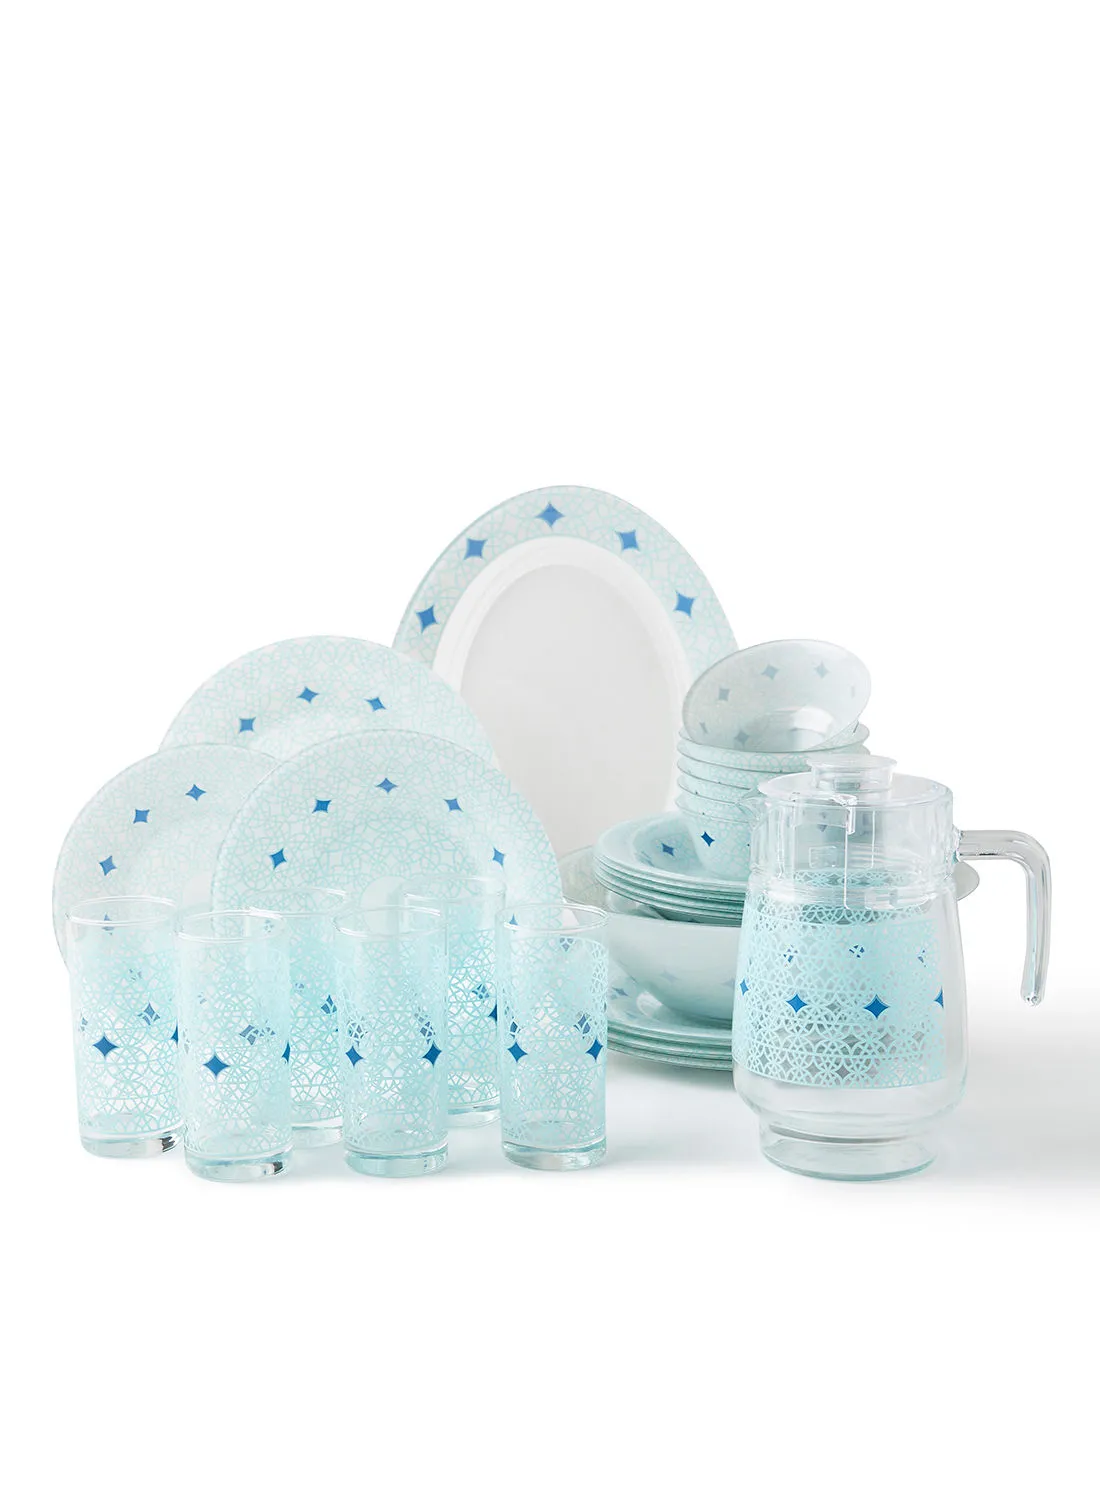 noon east 34 Piece Glass Dinner Set For Everyday Use - Light Weight Dishes, Plates - Dinner Plate, Side Plate, Bowl - Serves 6 - Printed Design Gracey